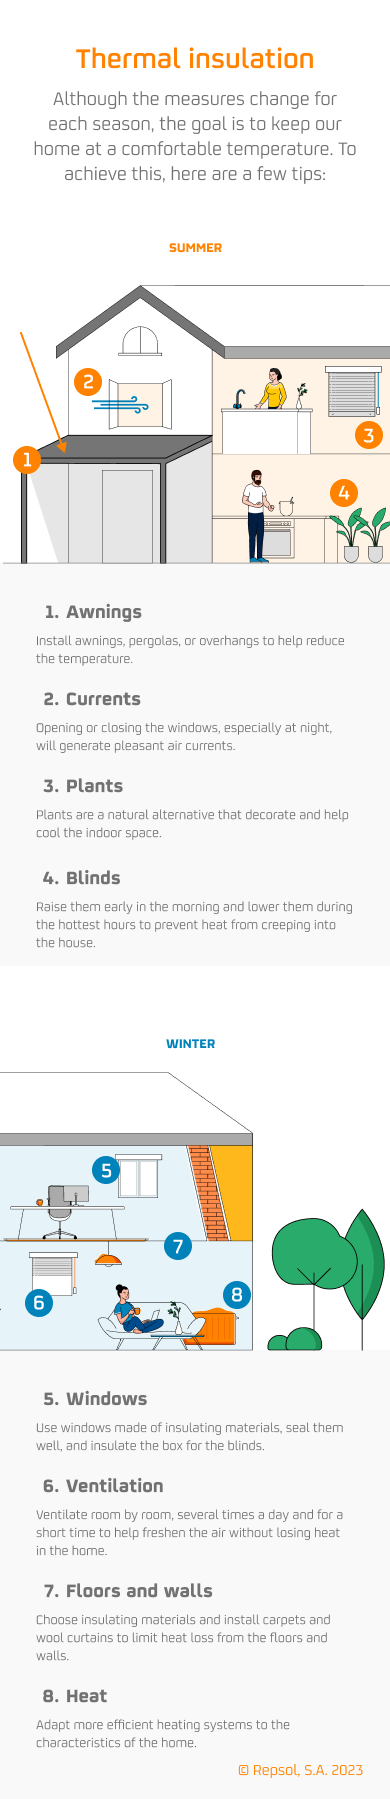 Thermal insulation infographic